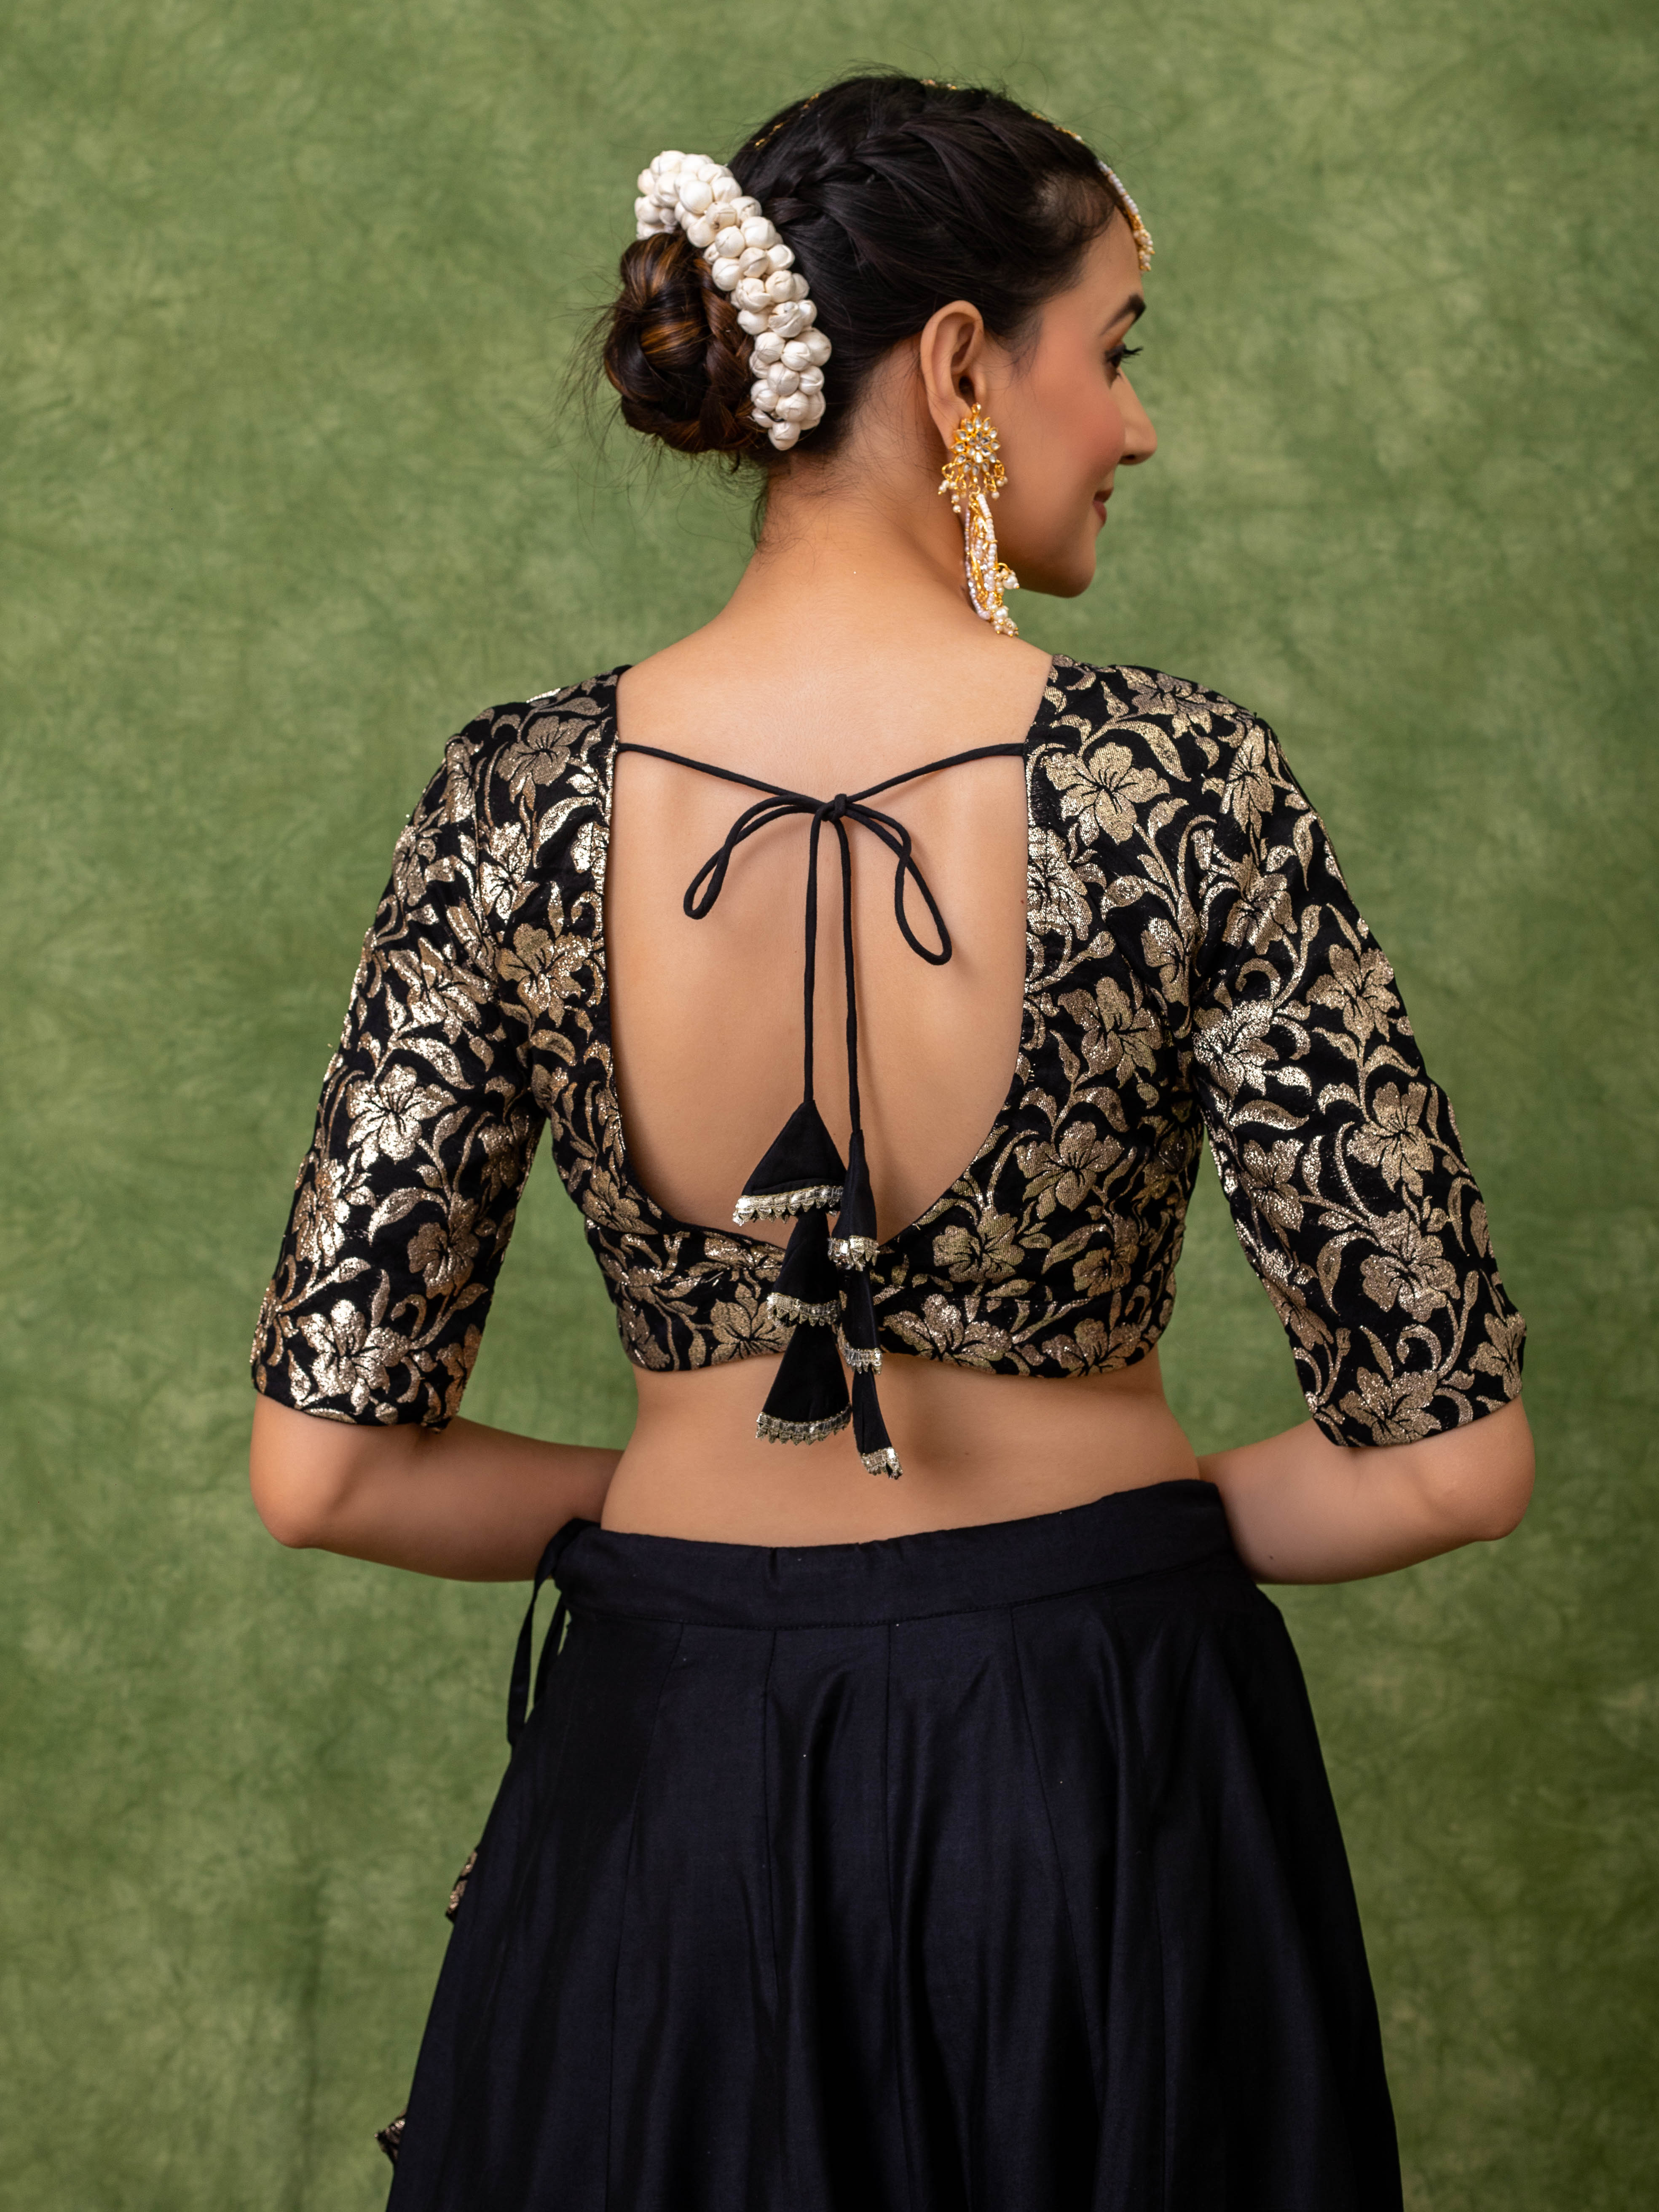 lehenga-set-in-black-with-floral-jacquard-jaal-on-the-blouse